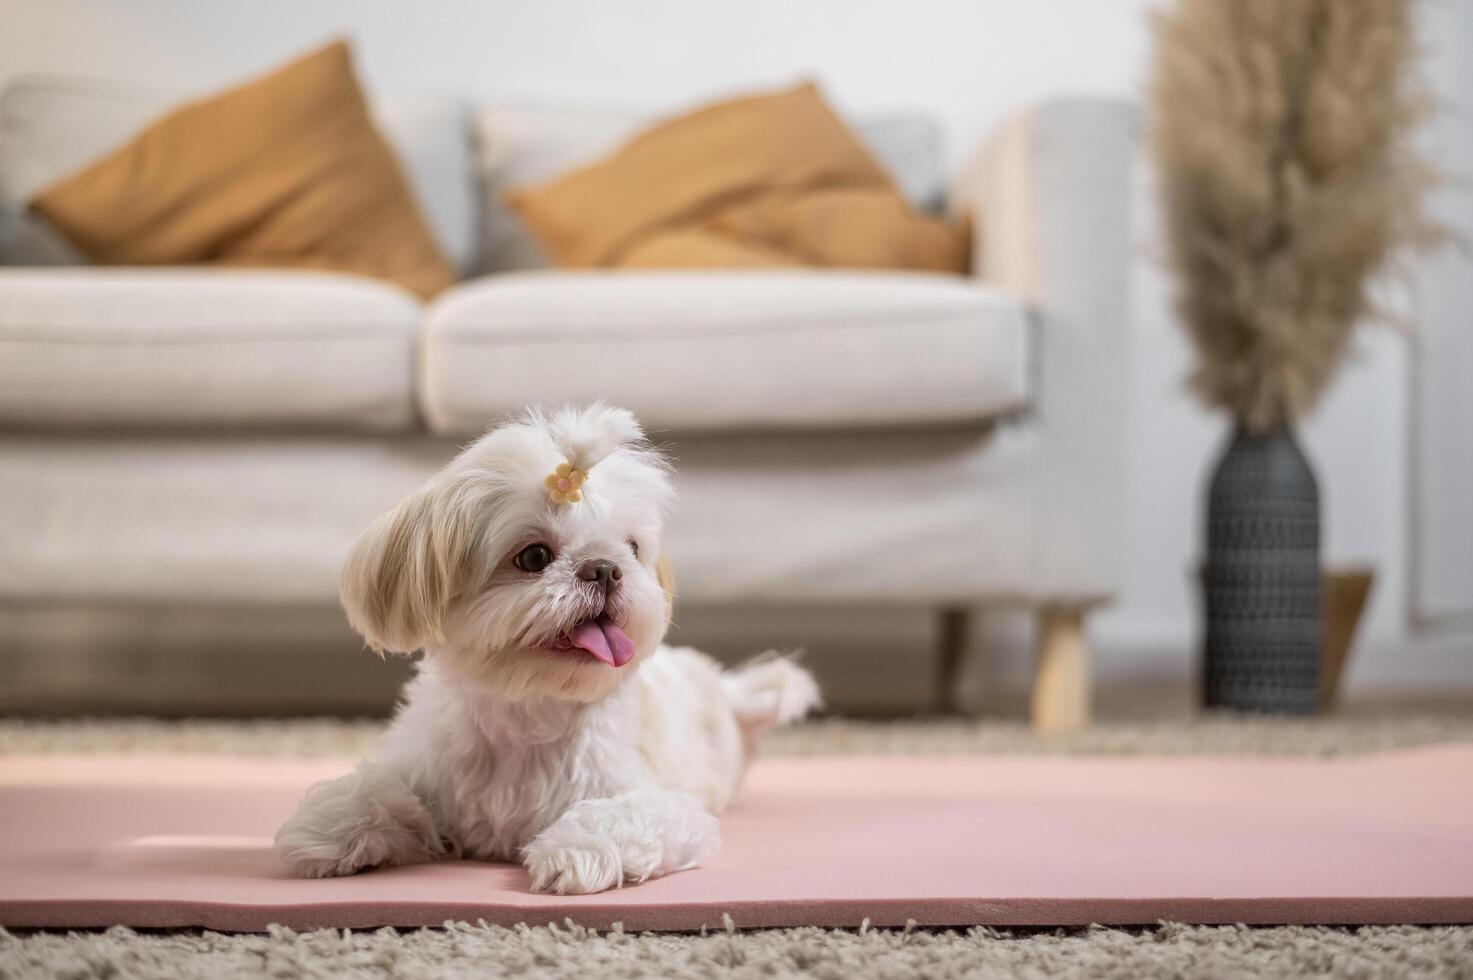 A cute dog in living room photo